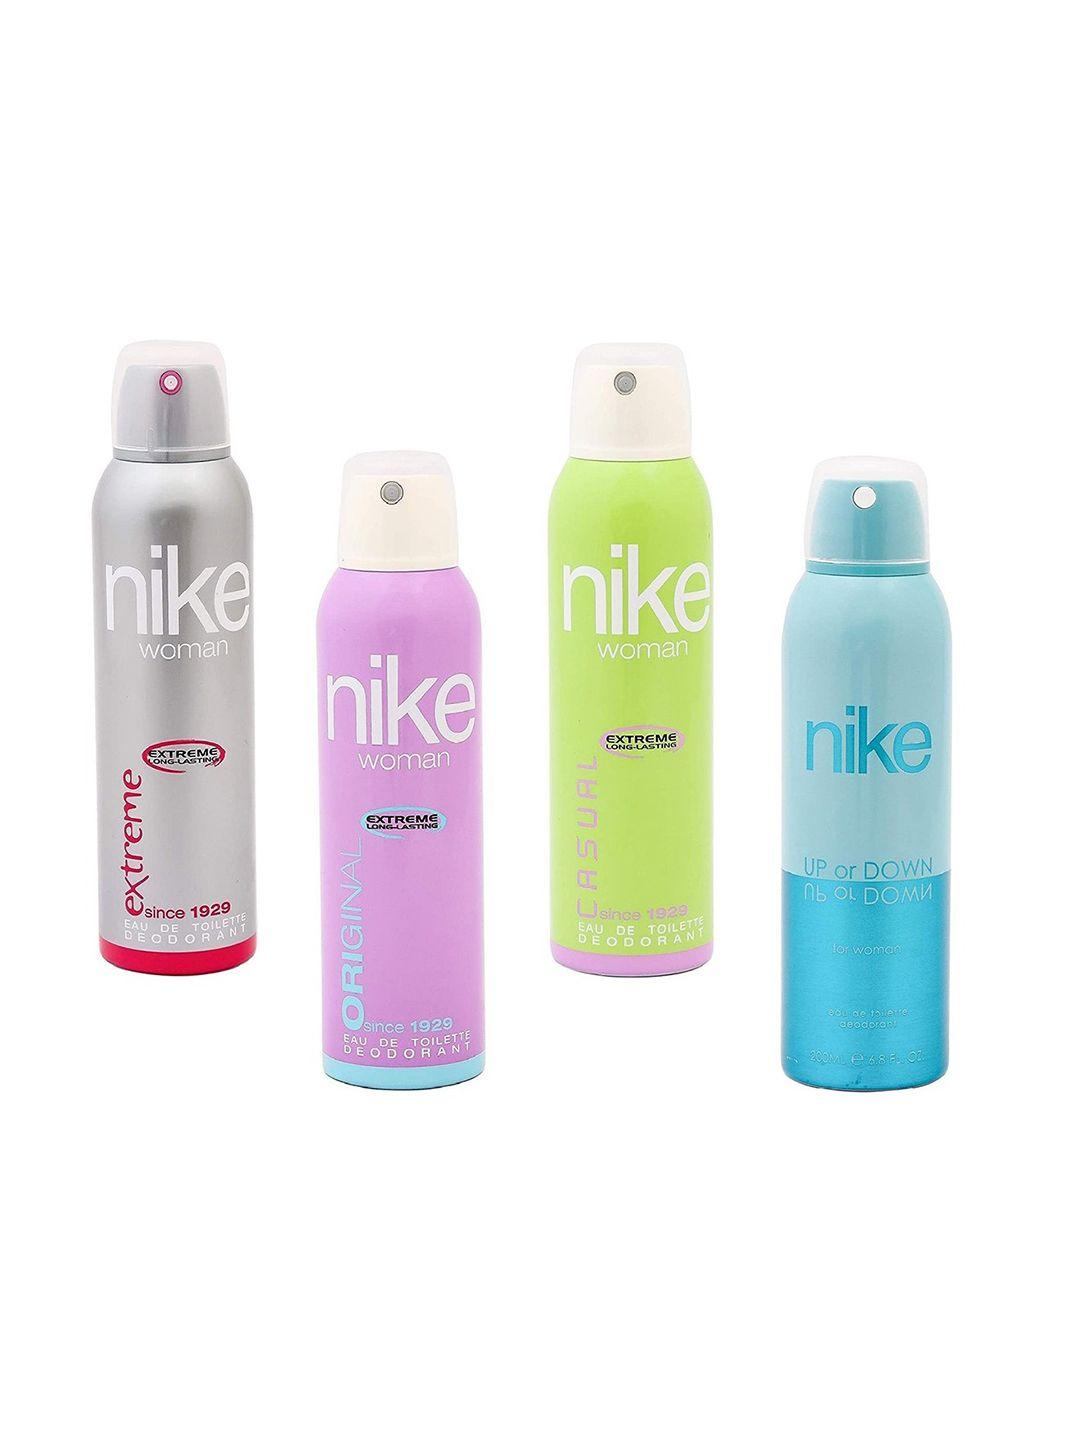 nike pack of 4 woman extreme/original/casual/up or down deodorant - 200 ml each